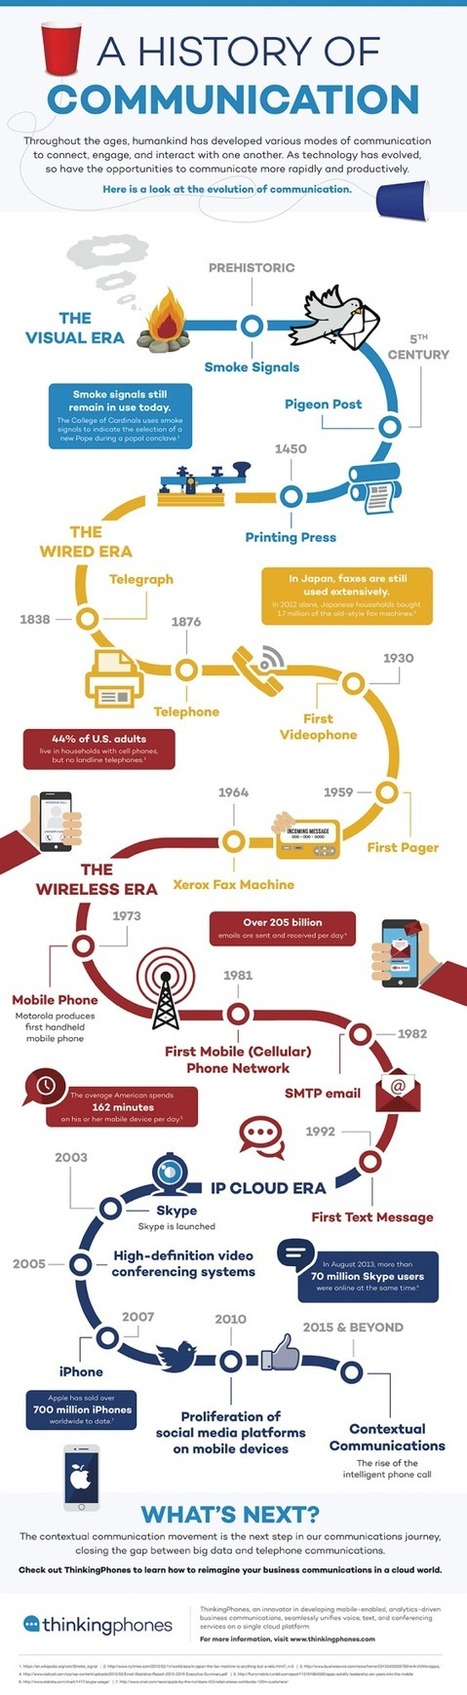 A History of Communication Infographic | E-Learning-Inclusivo (Mashup) | Scoop.it